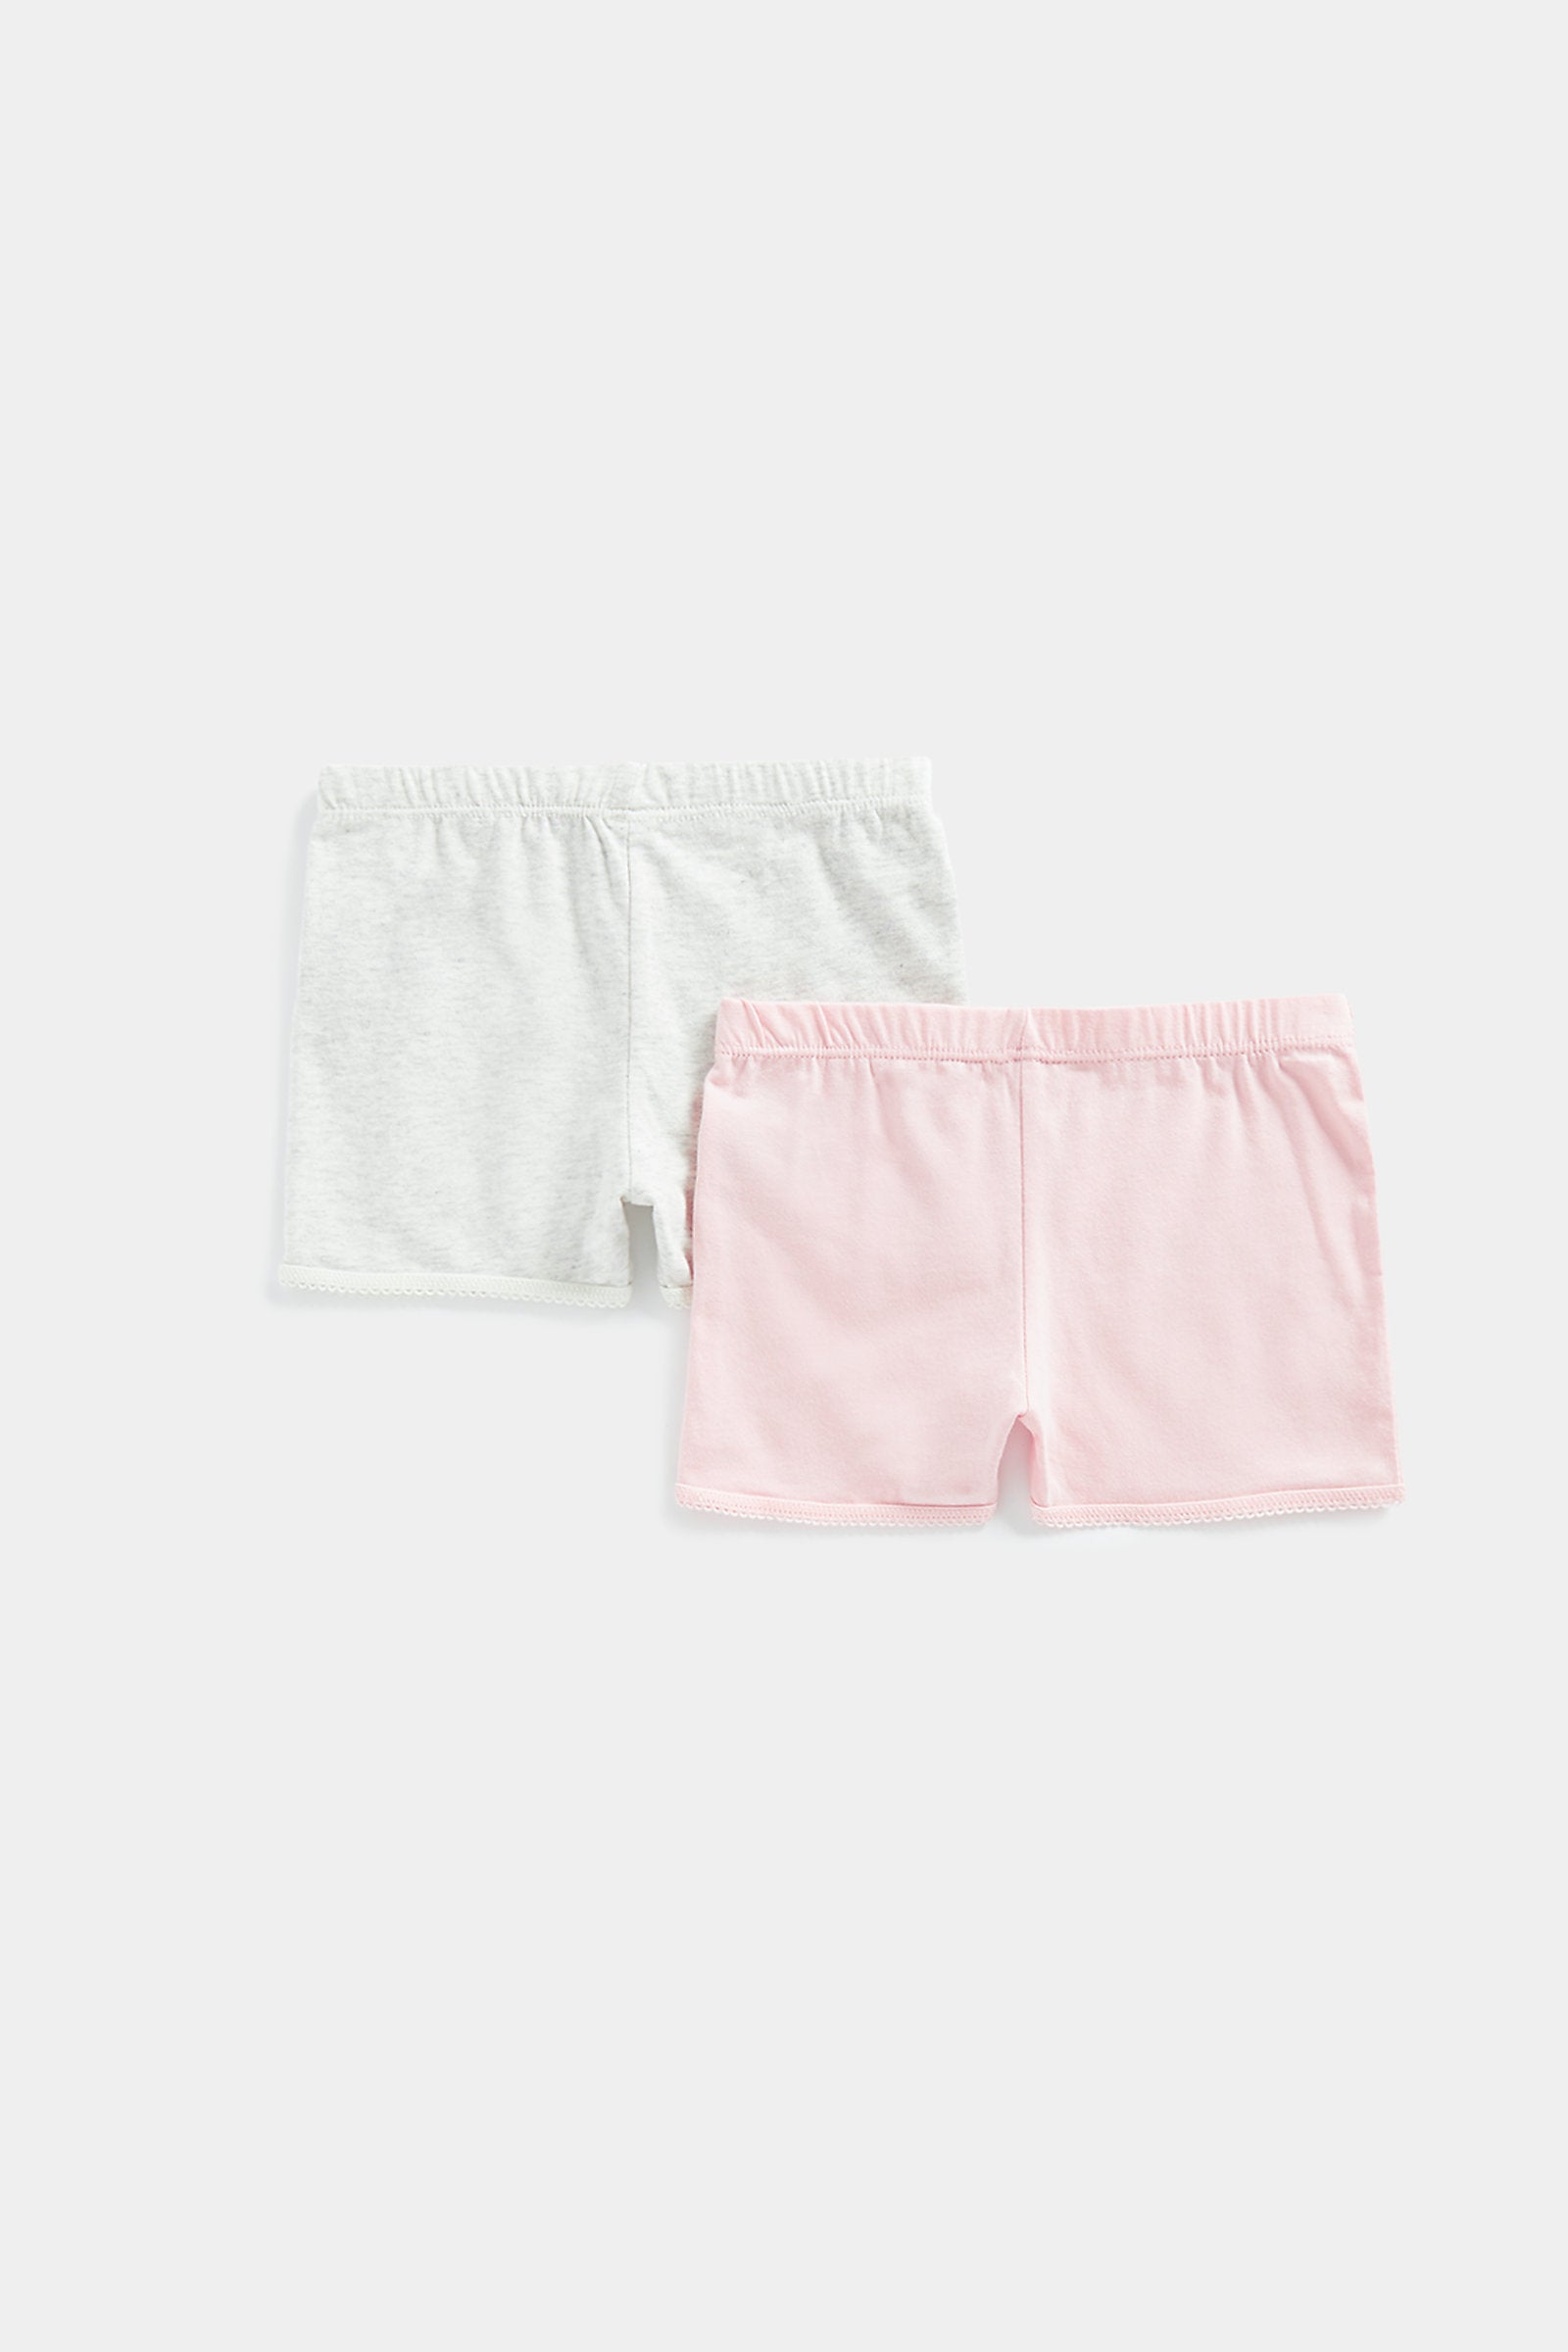 Mothercare Modesty Shorts - 2 Pack